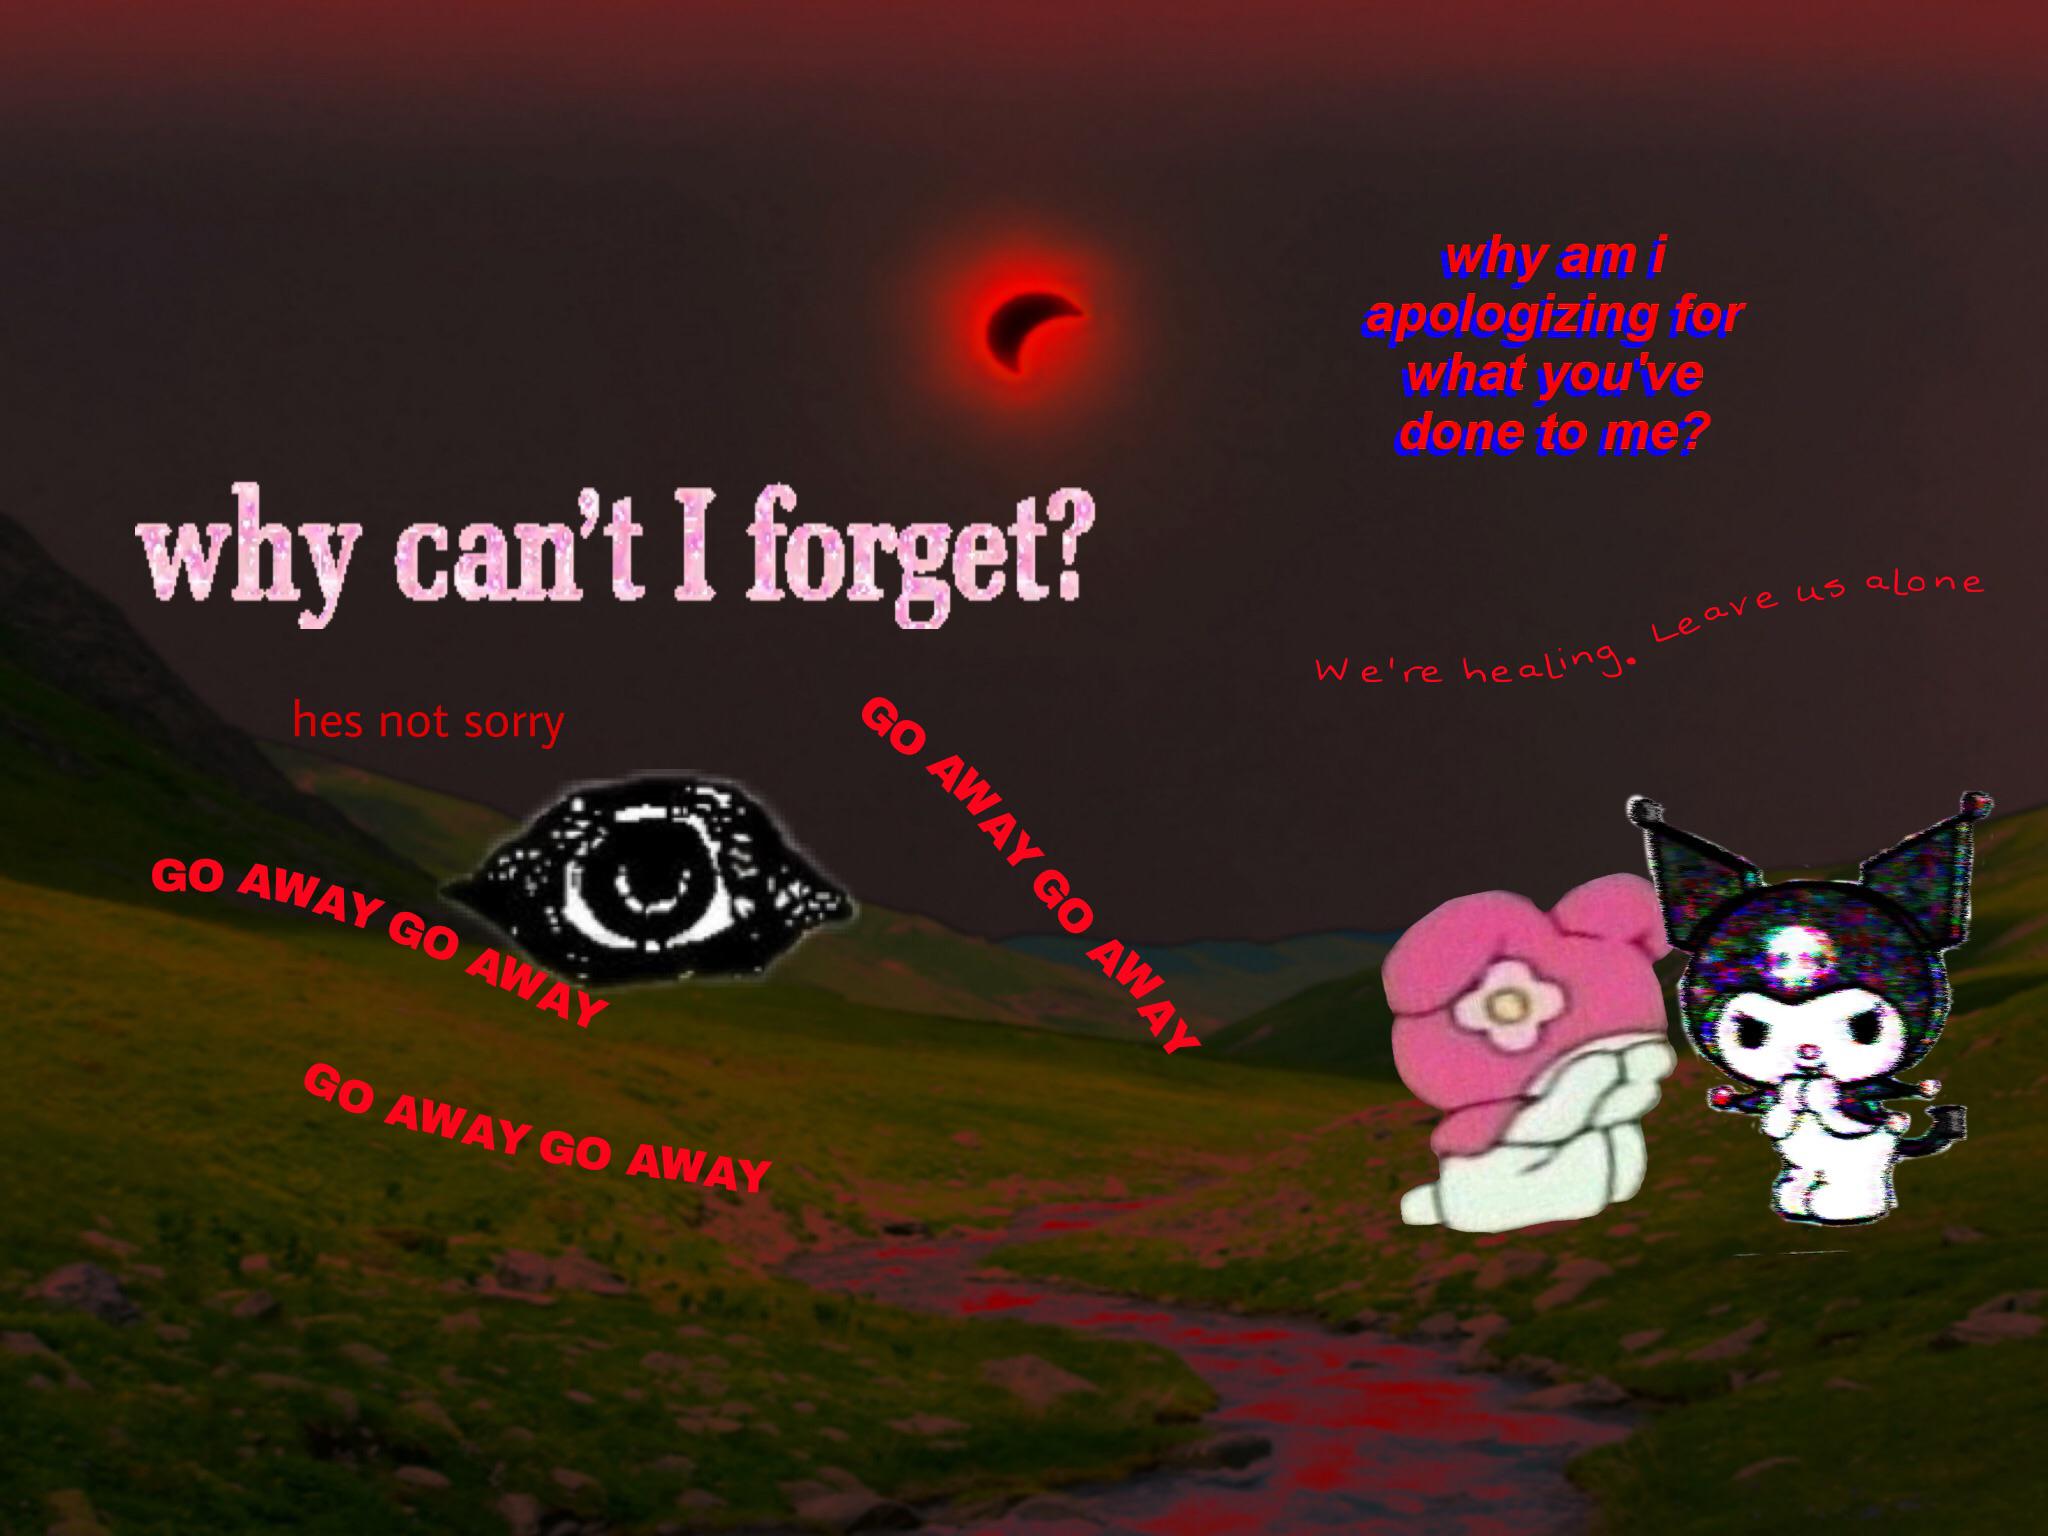 A dark red image with a red sun and the words 